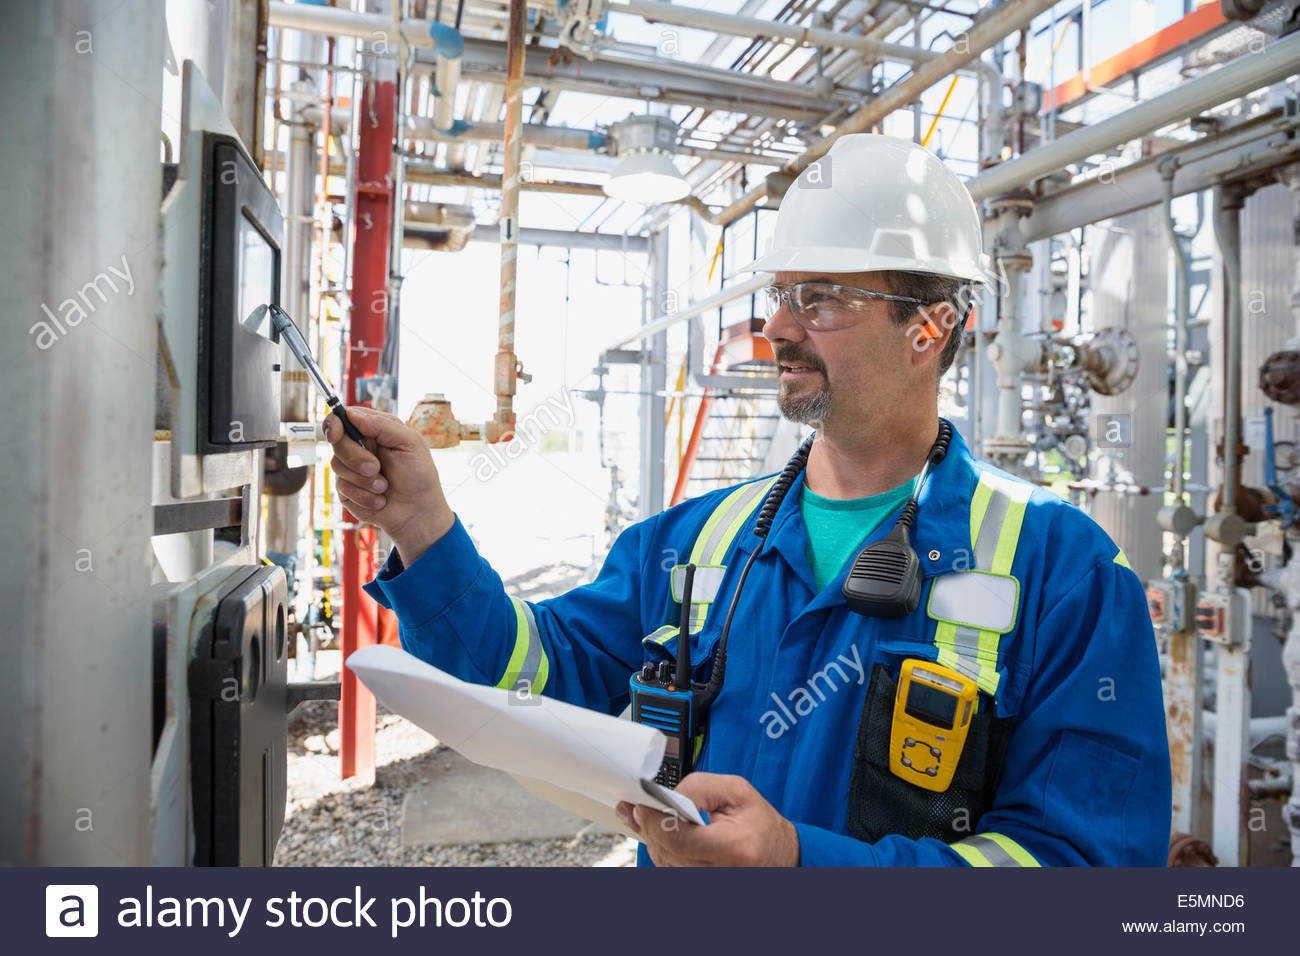 Male worker checking equipment at gas plant Stock Photo